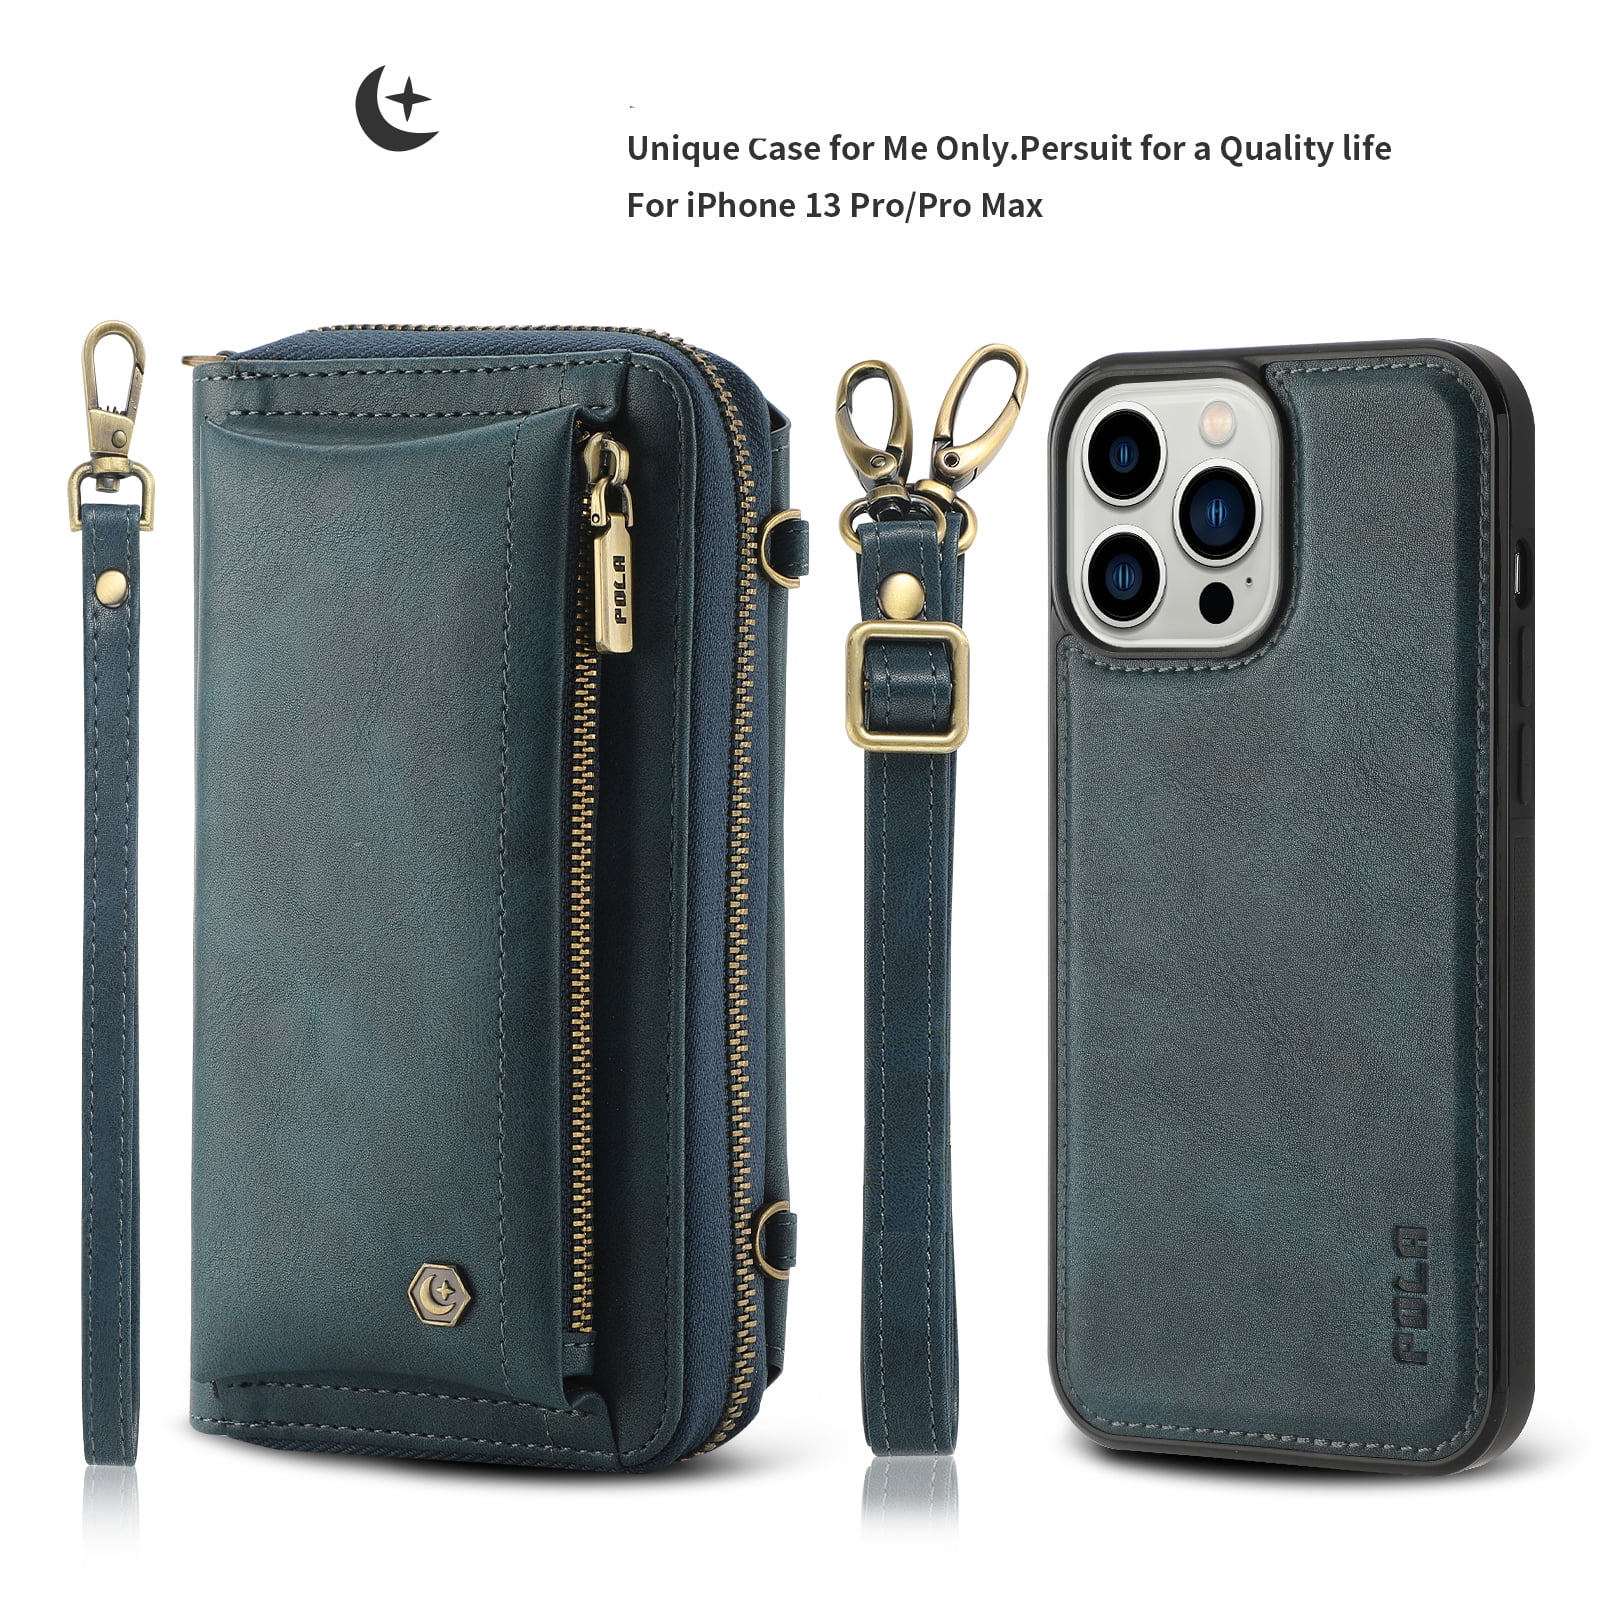  Yatchen for iPhone 14 Pro Max Wallet Case ,Crossbody